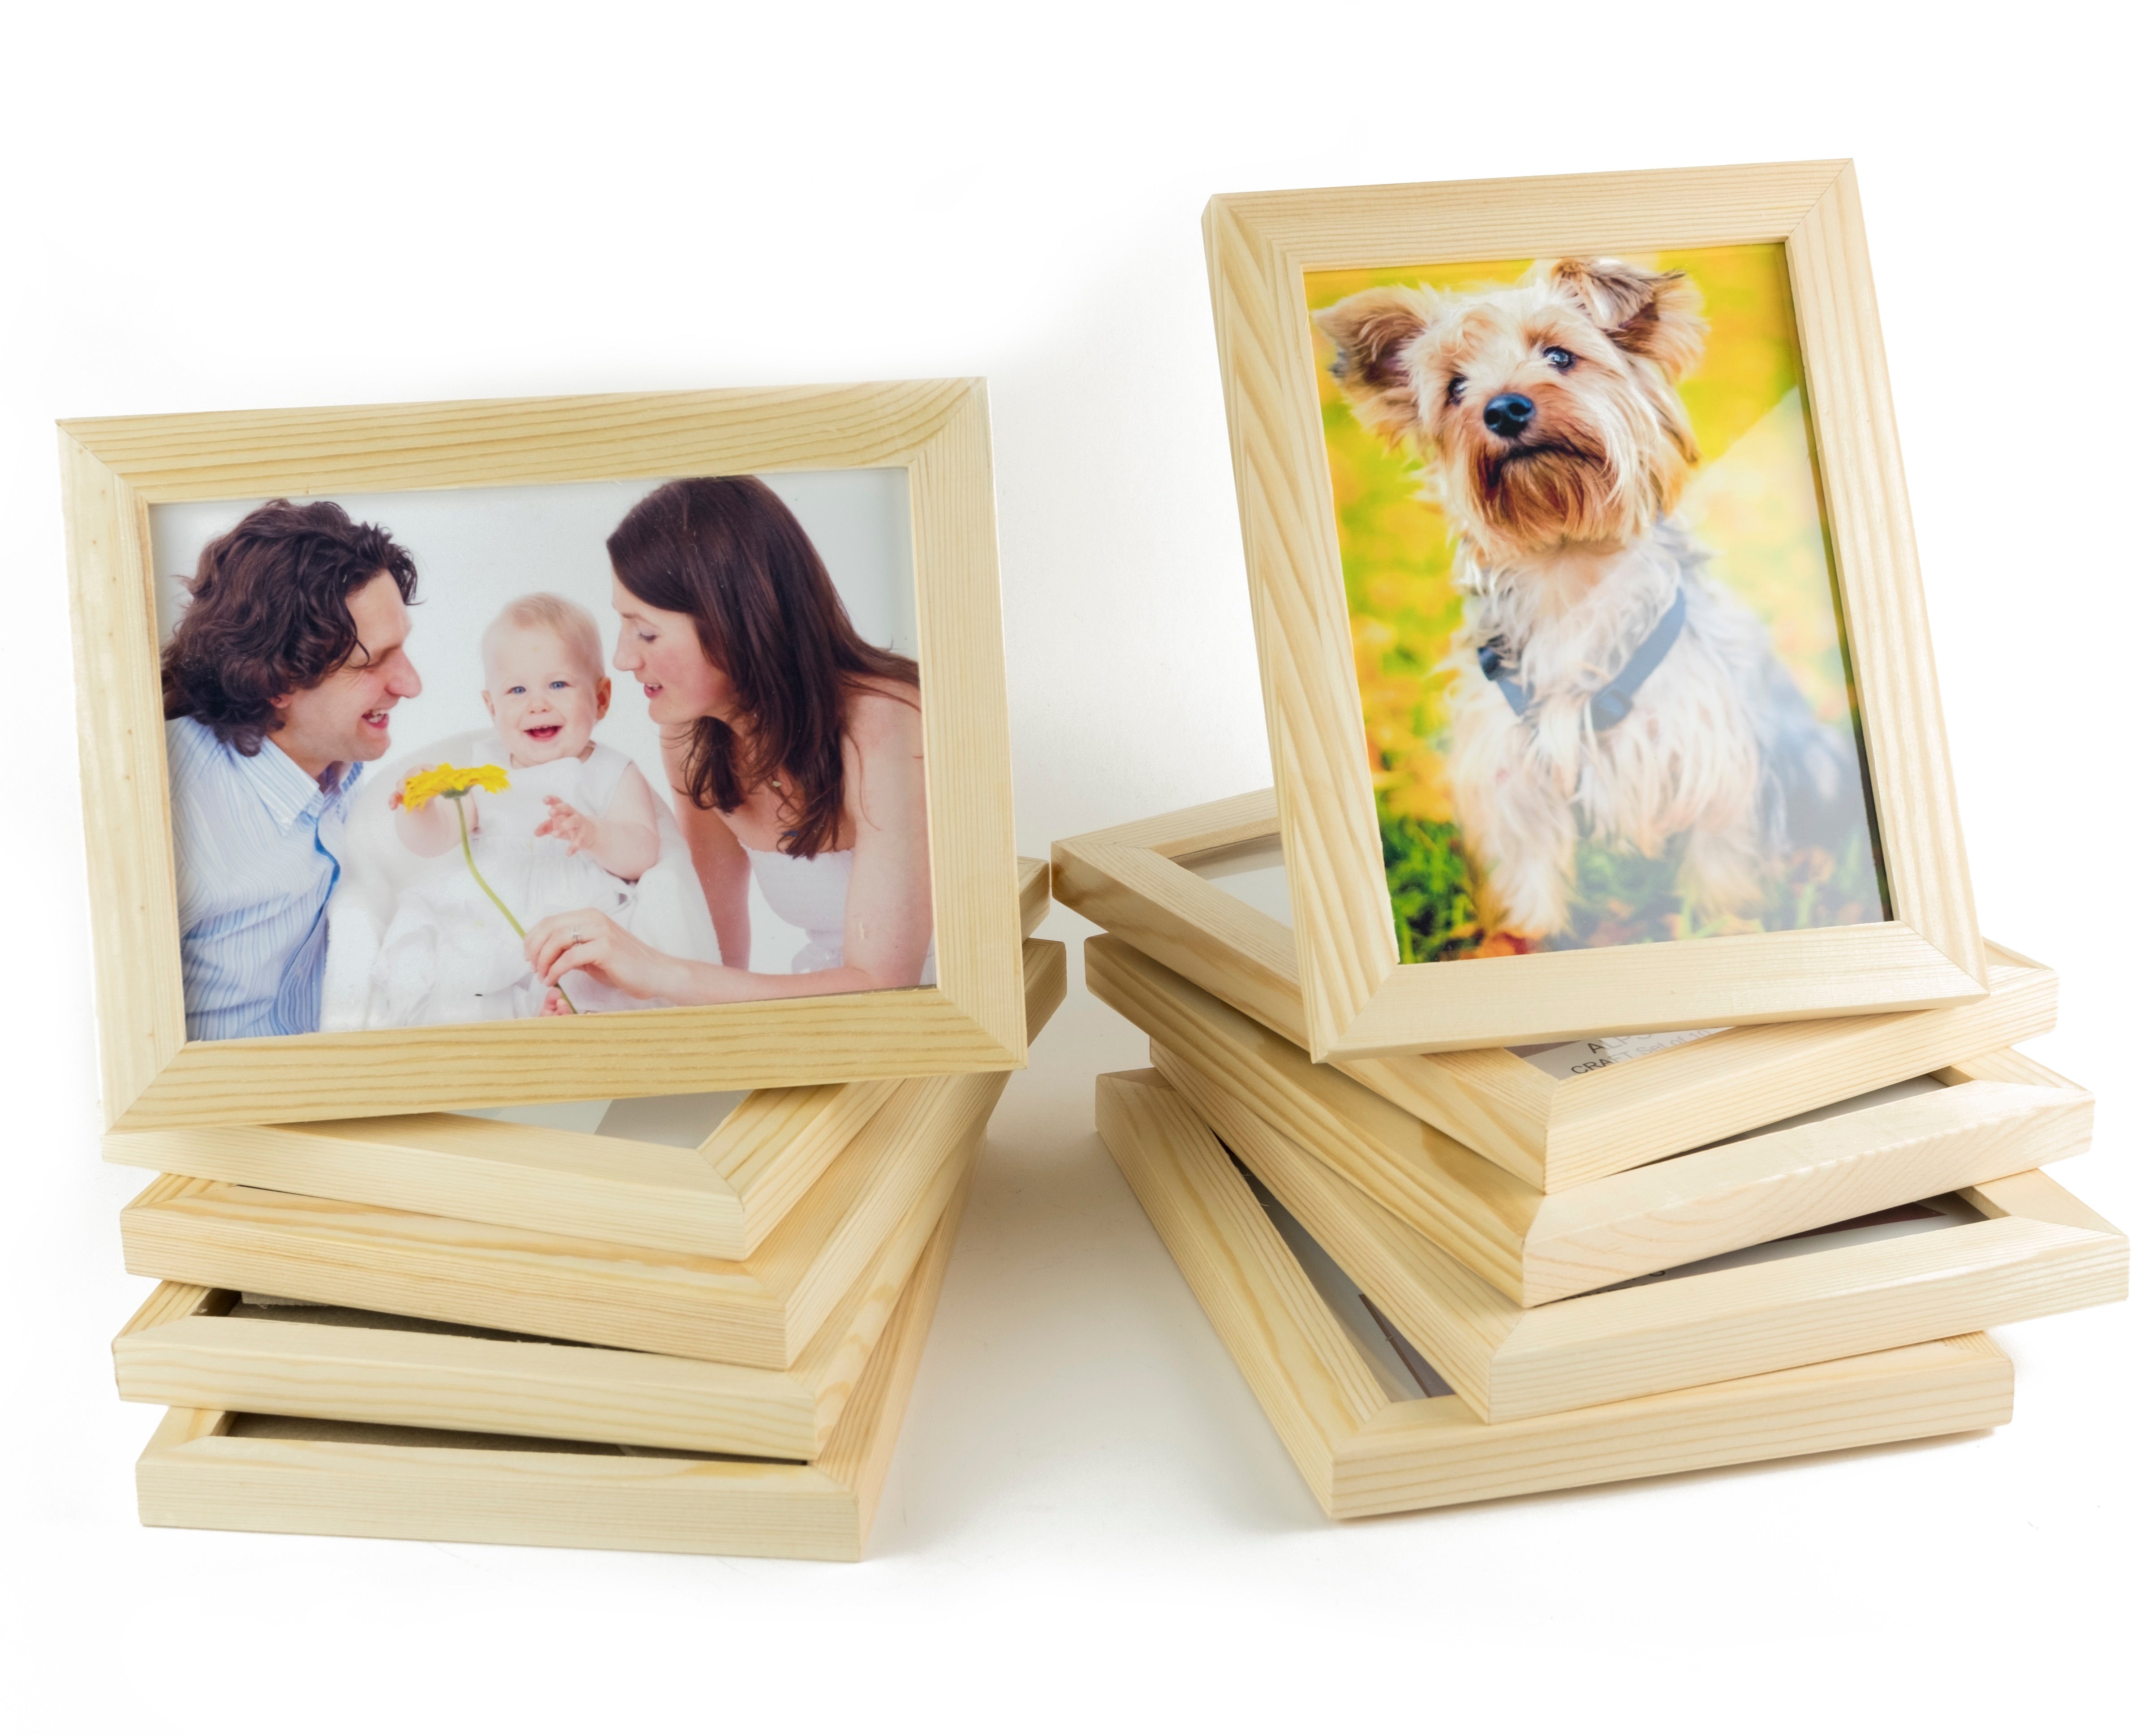 WOODALPS 5" x 7" Wooden Picture Frame - Set of 10 - Wallniture